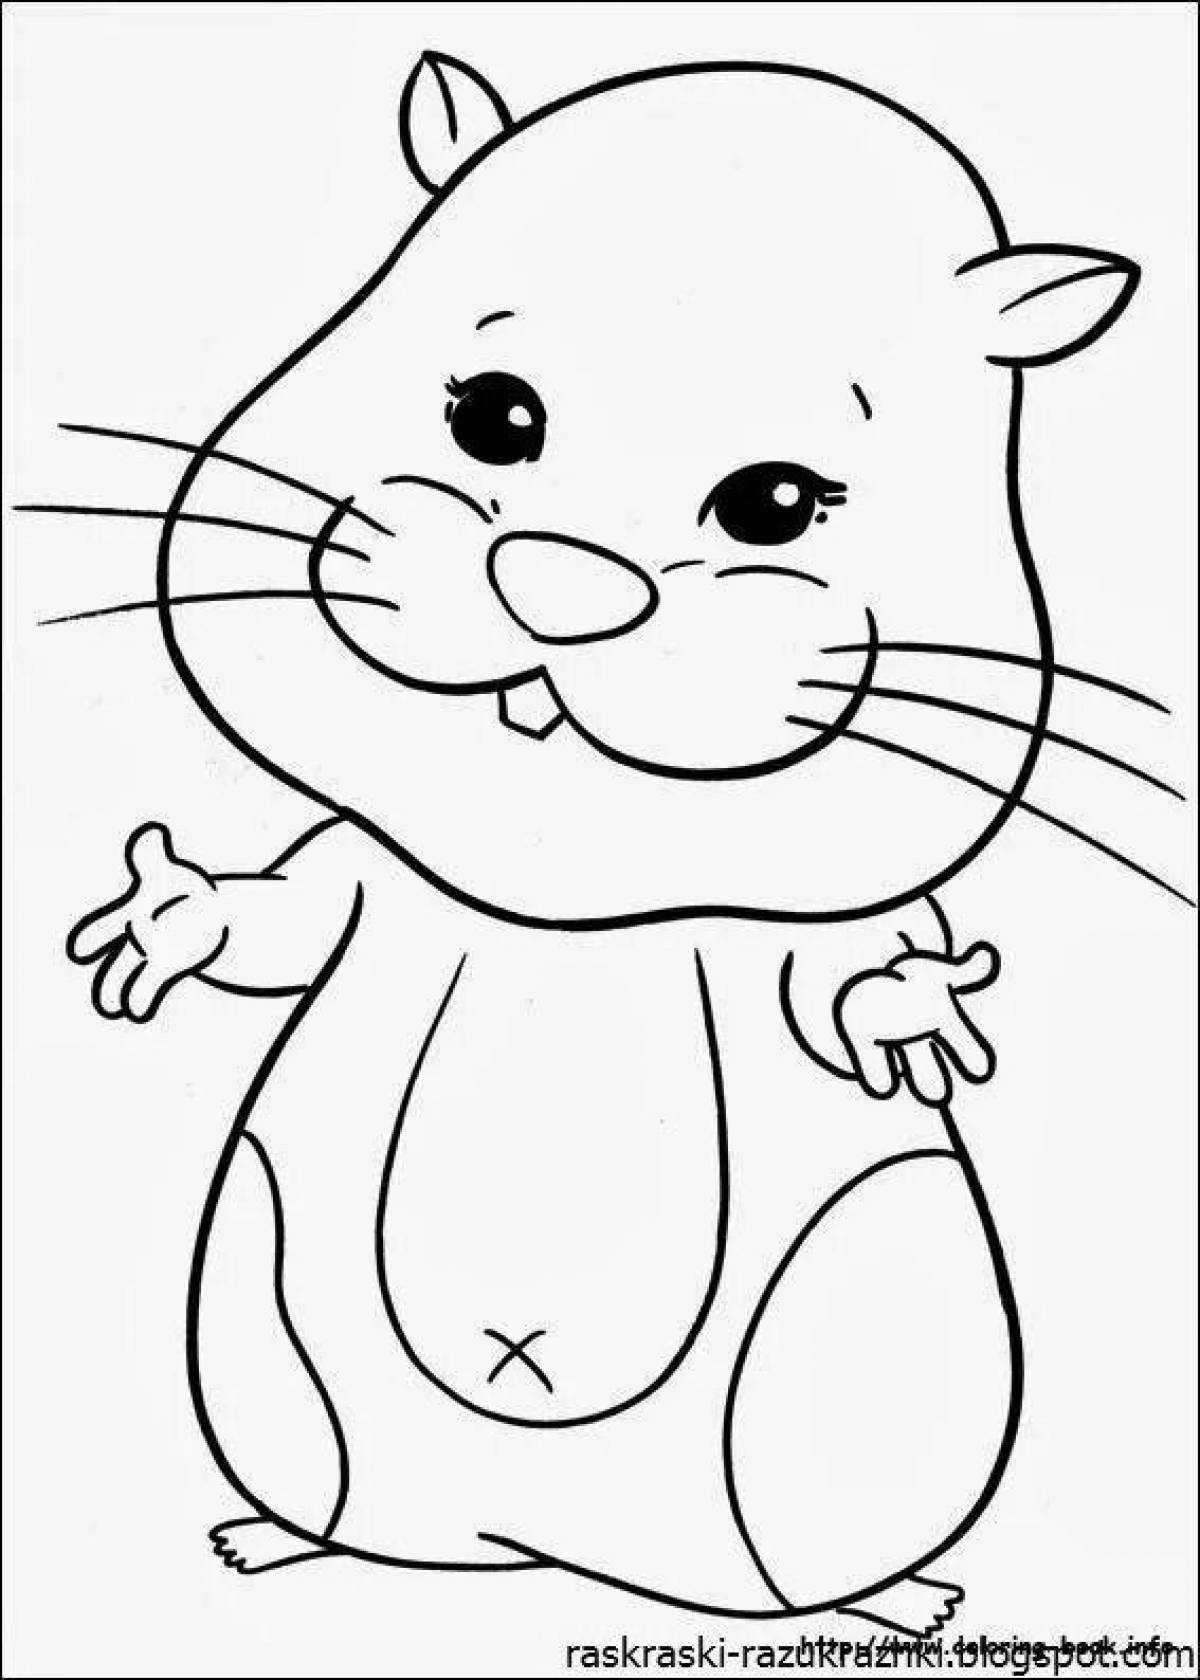 Playful hamster coloring page for kids